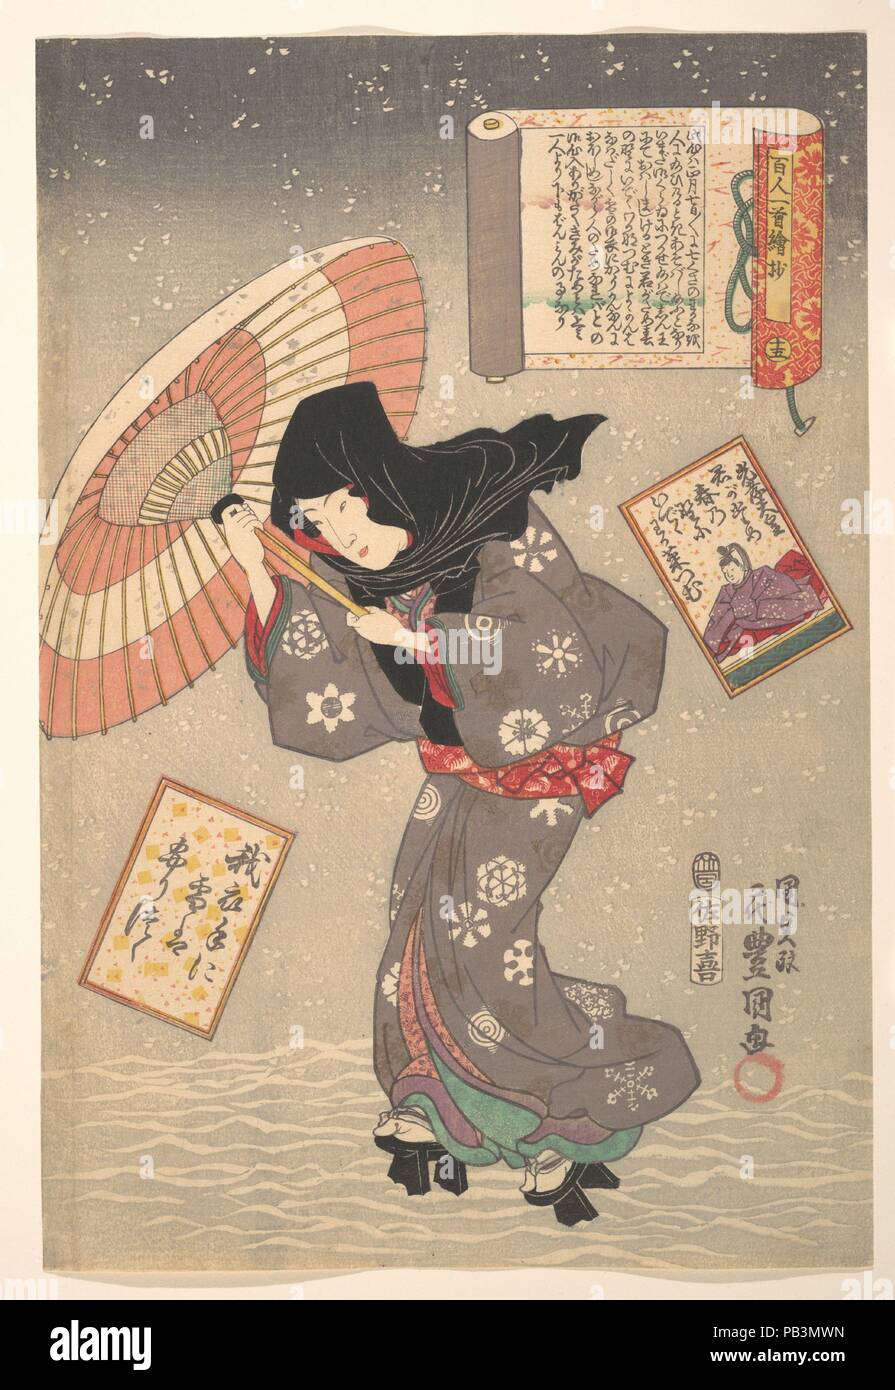 Selected Scenes from One Poem Each by One Hundred Poets: Poem by Emperor  Koko. Artist: Utagawa Kunisada (Japanese, 1786-1865). Culture: Japan.  Dimensions: Image: 14 5/8 x 9 7/8 in. (37.1 x 25.1